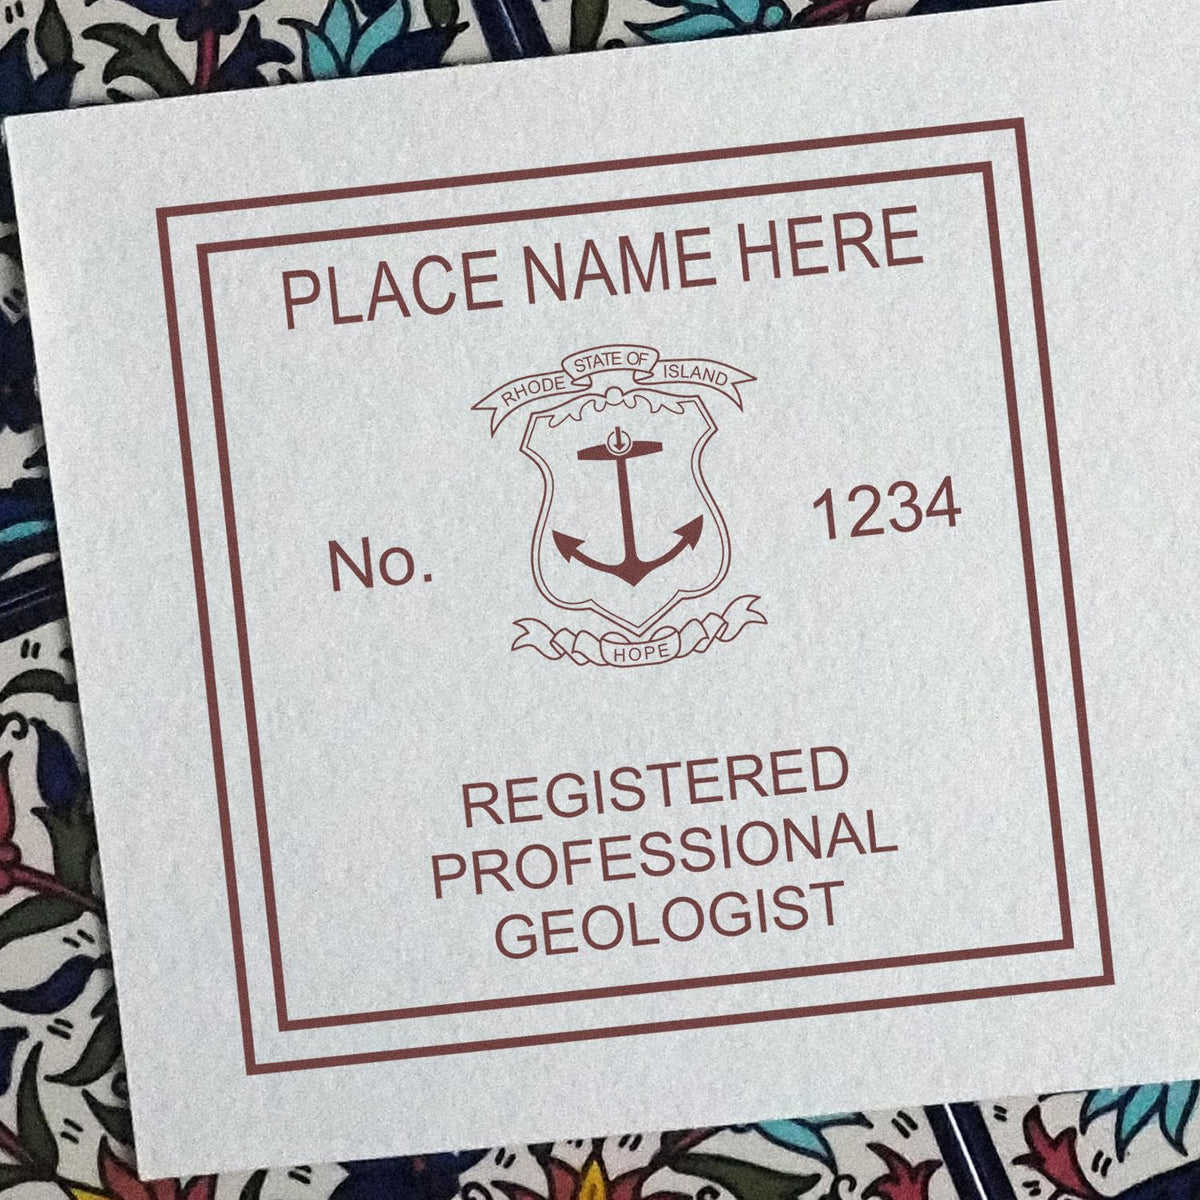 Another Example of a stamped impression of the Slim Pre-Inked Rhode Island Professional Geologist Seal Stamp on a office form